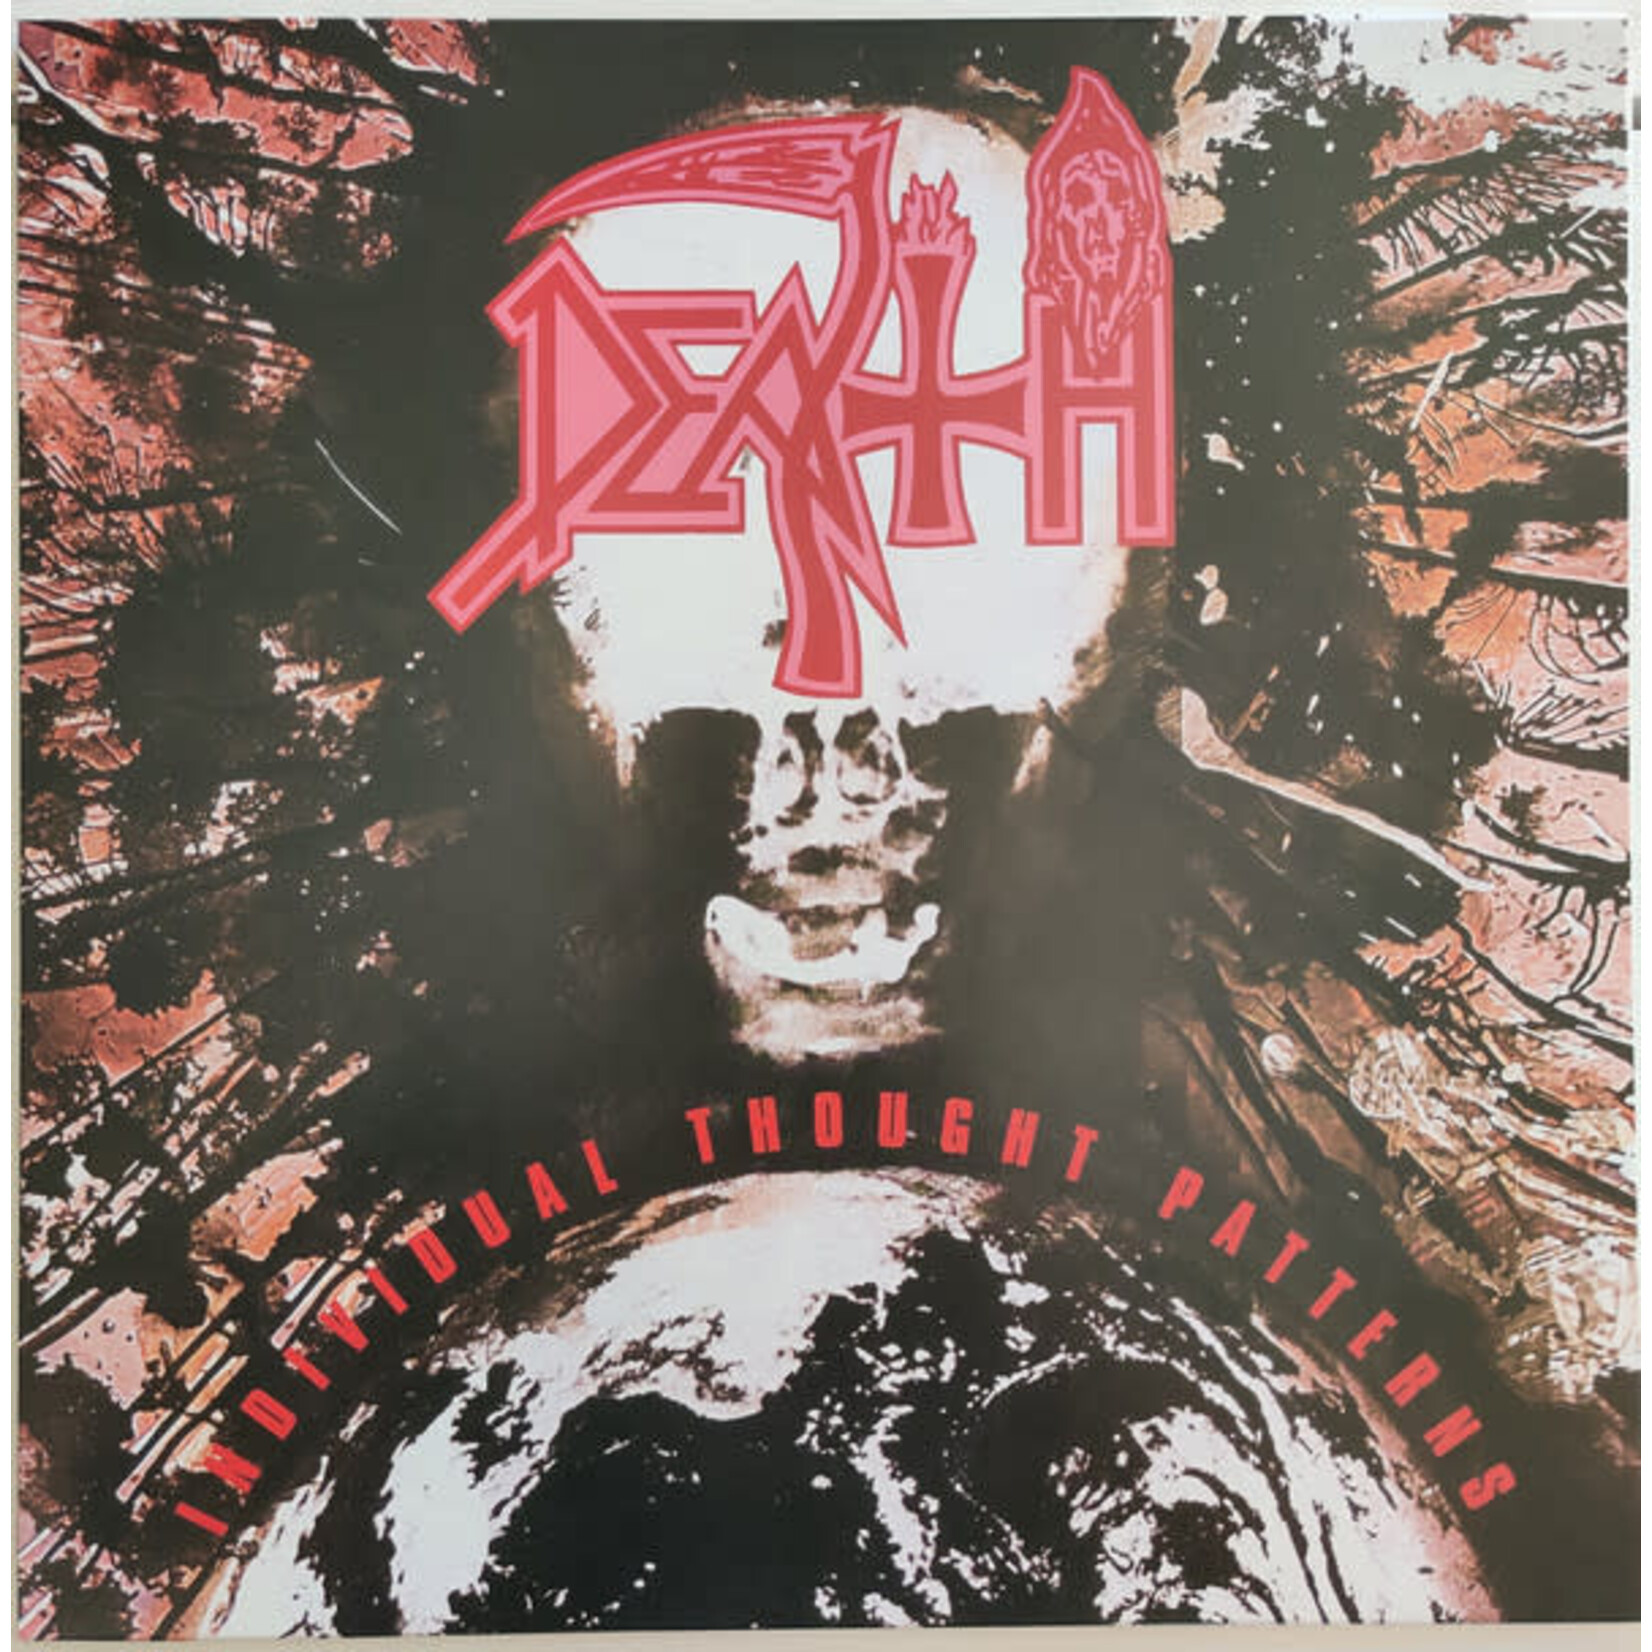 Relapse Death - Individual Thought Patterns (LP)